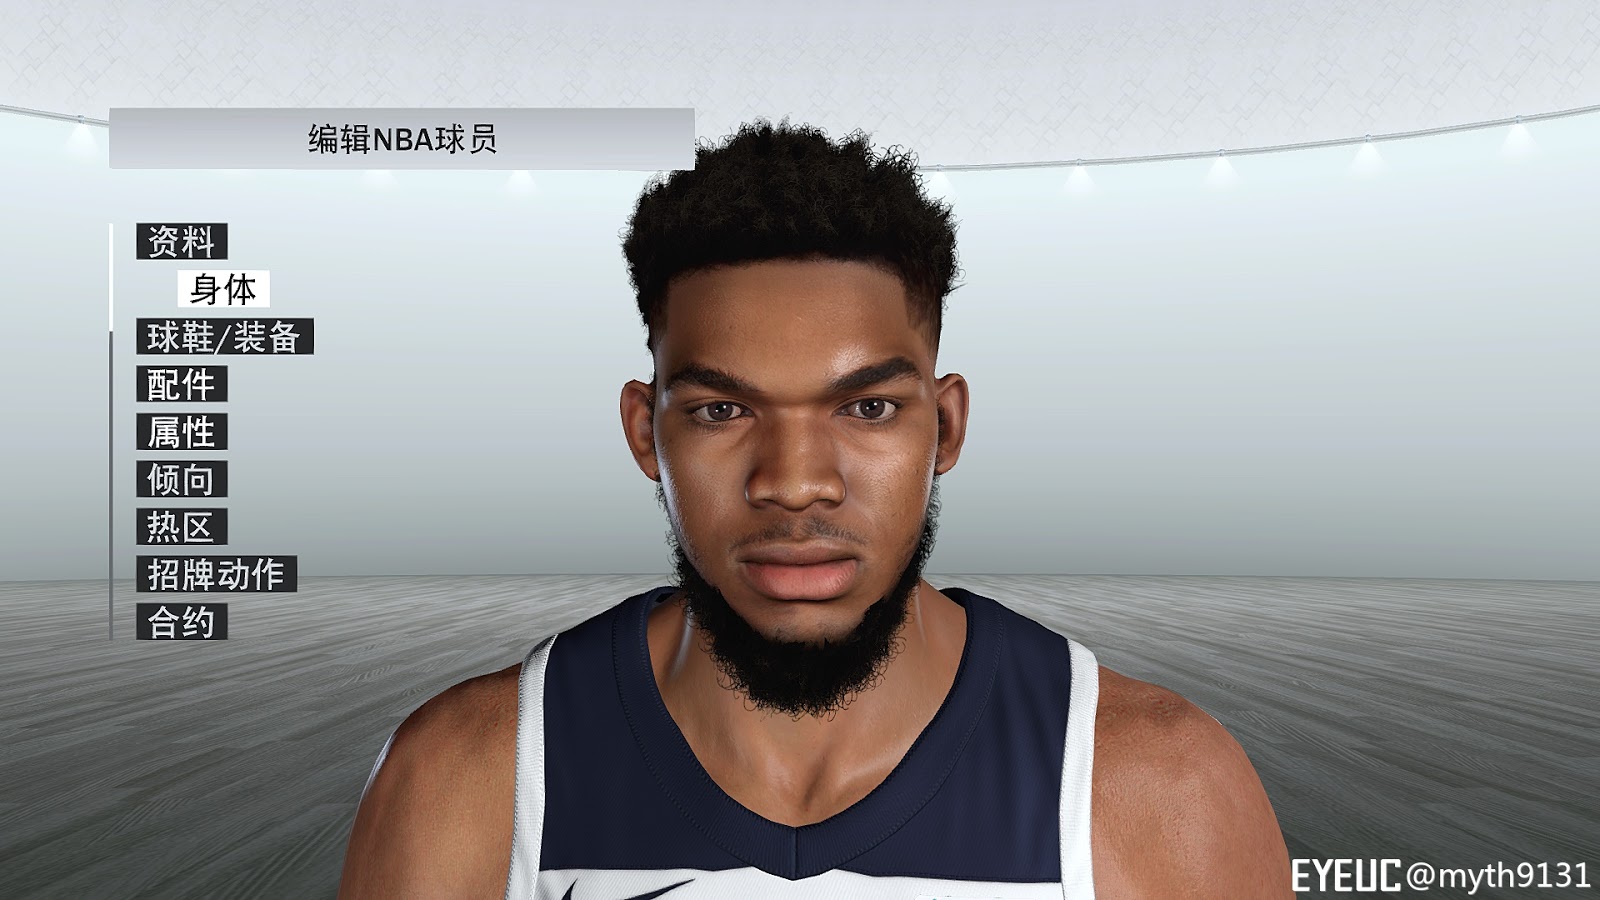 NBA 2K19 - Karl Anthony Towns Cyberface by myth25 - Shuajota | Your Videogame to the ...